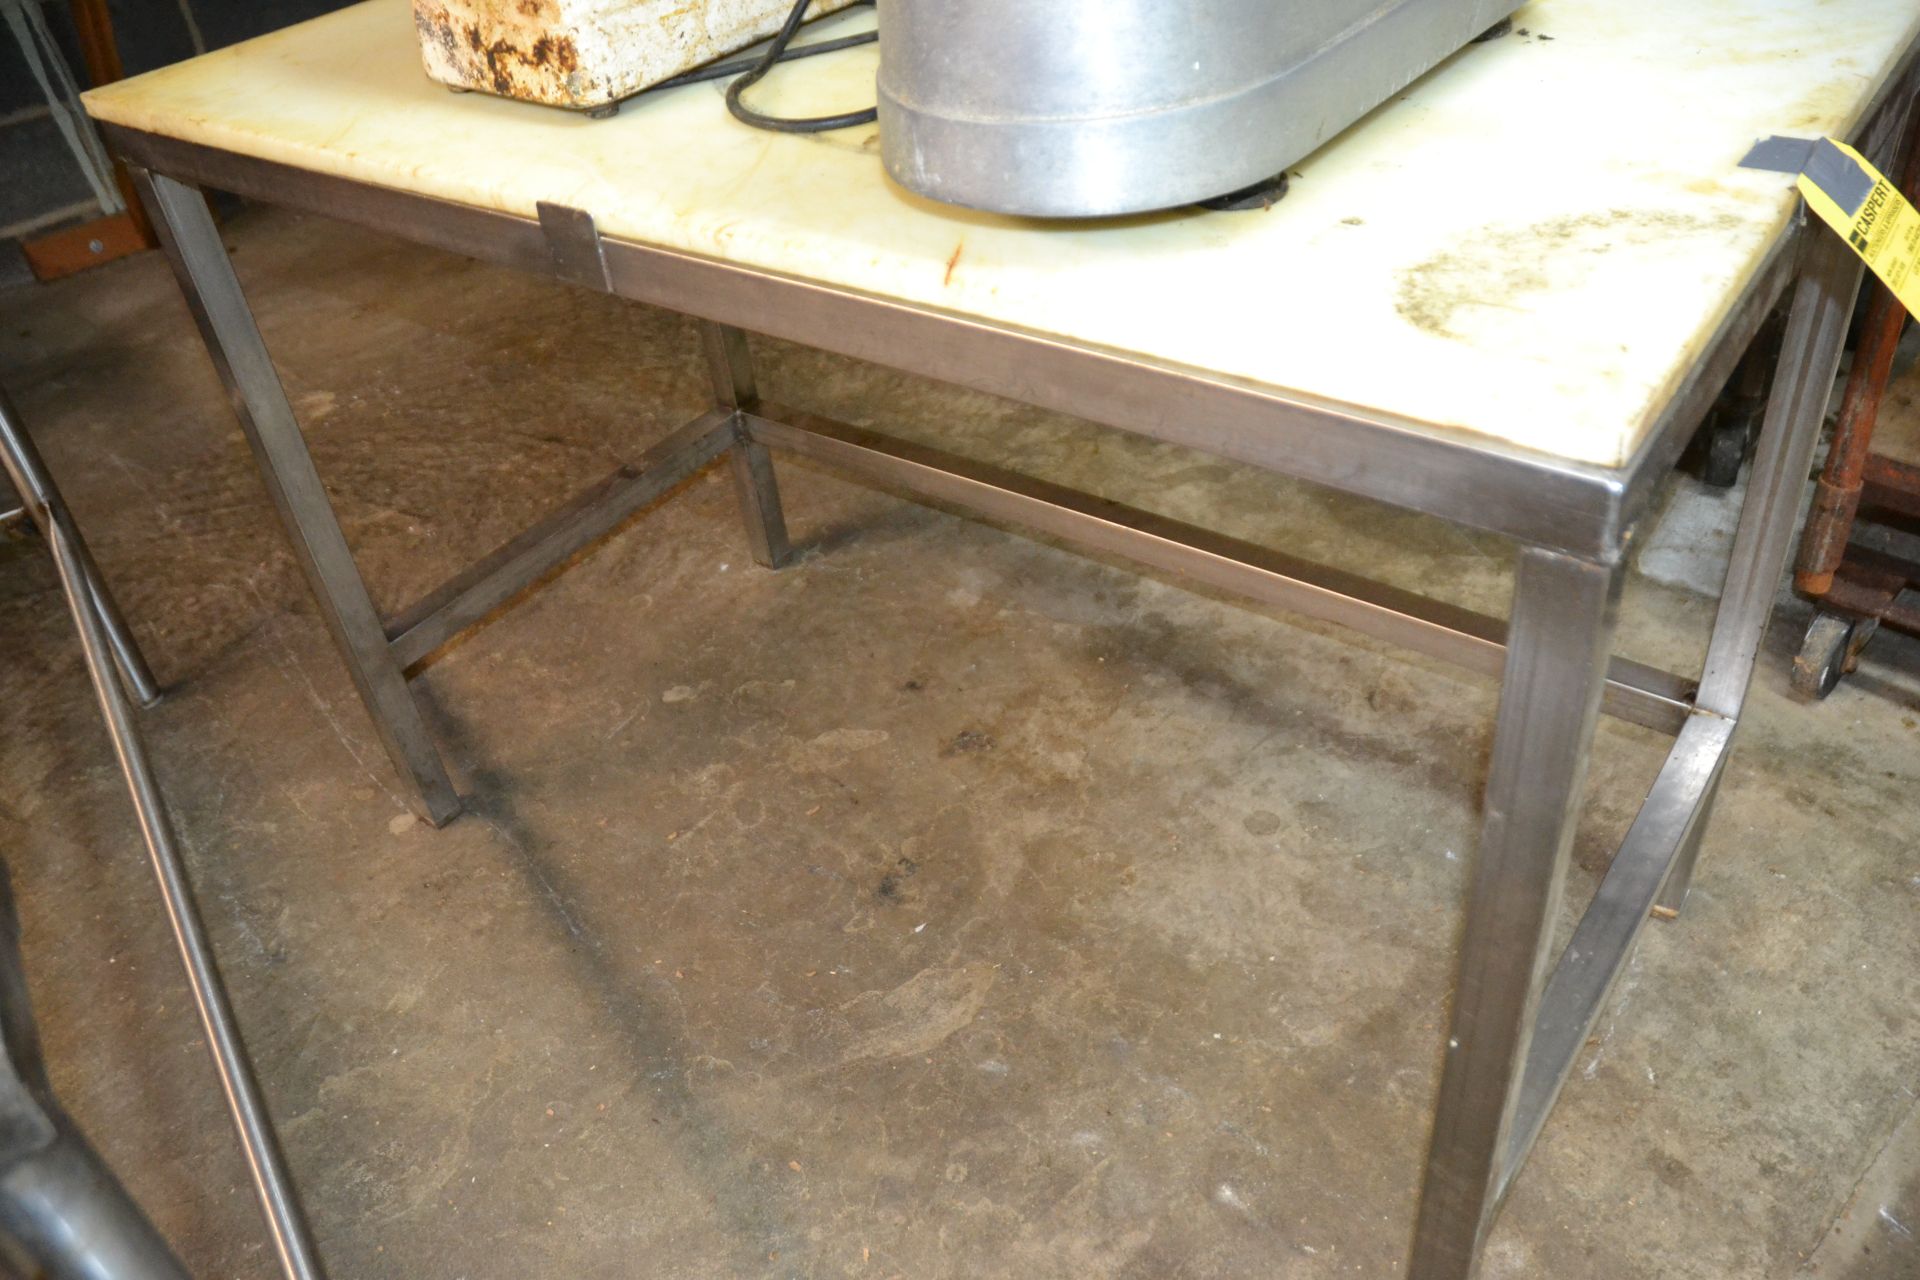 24" x 48" Stainless Steel Table w/ Cutting Board Top